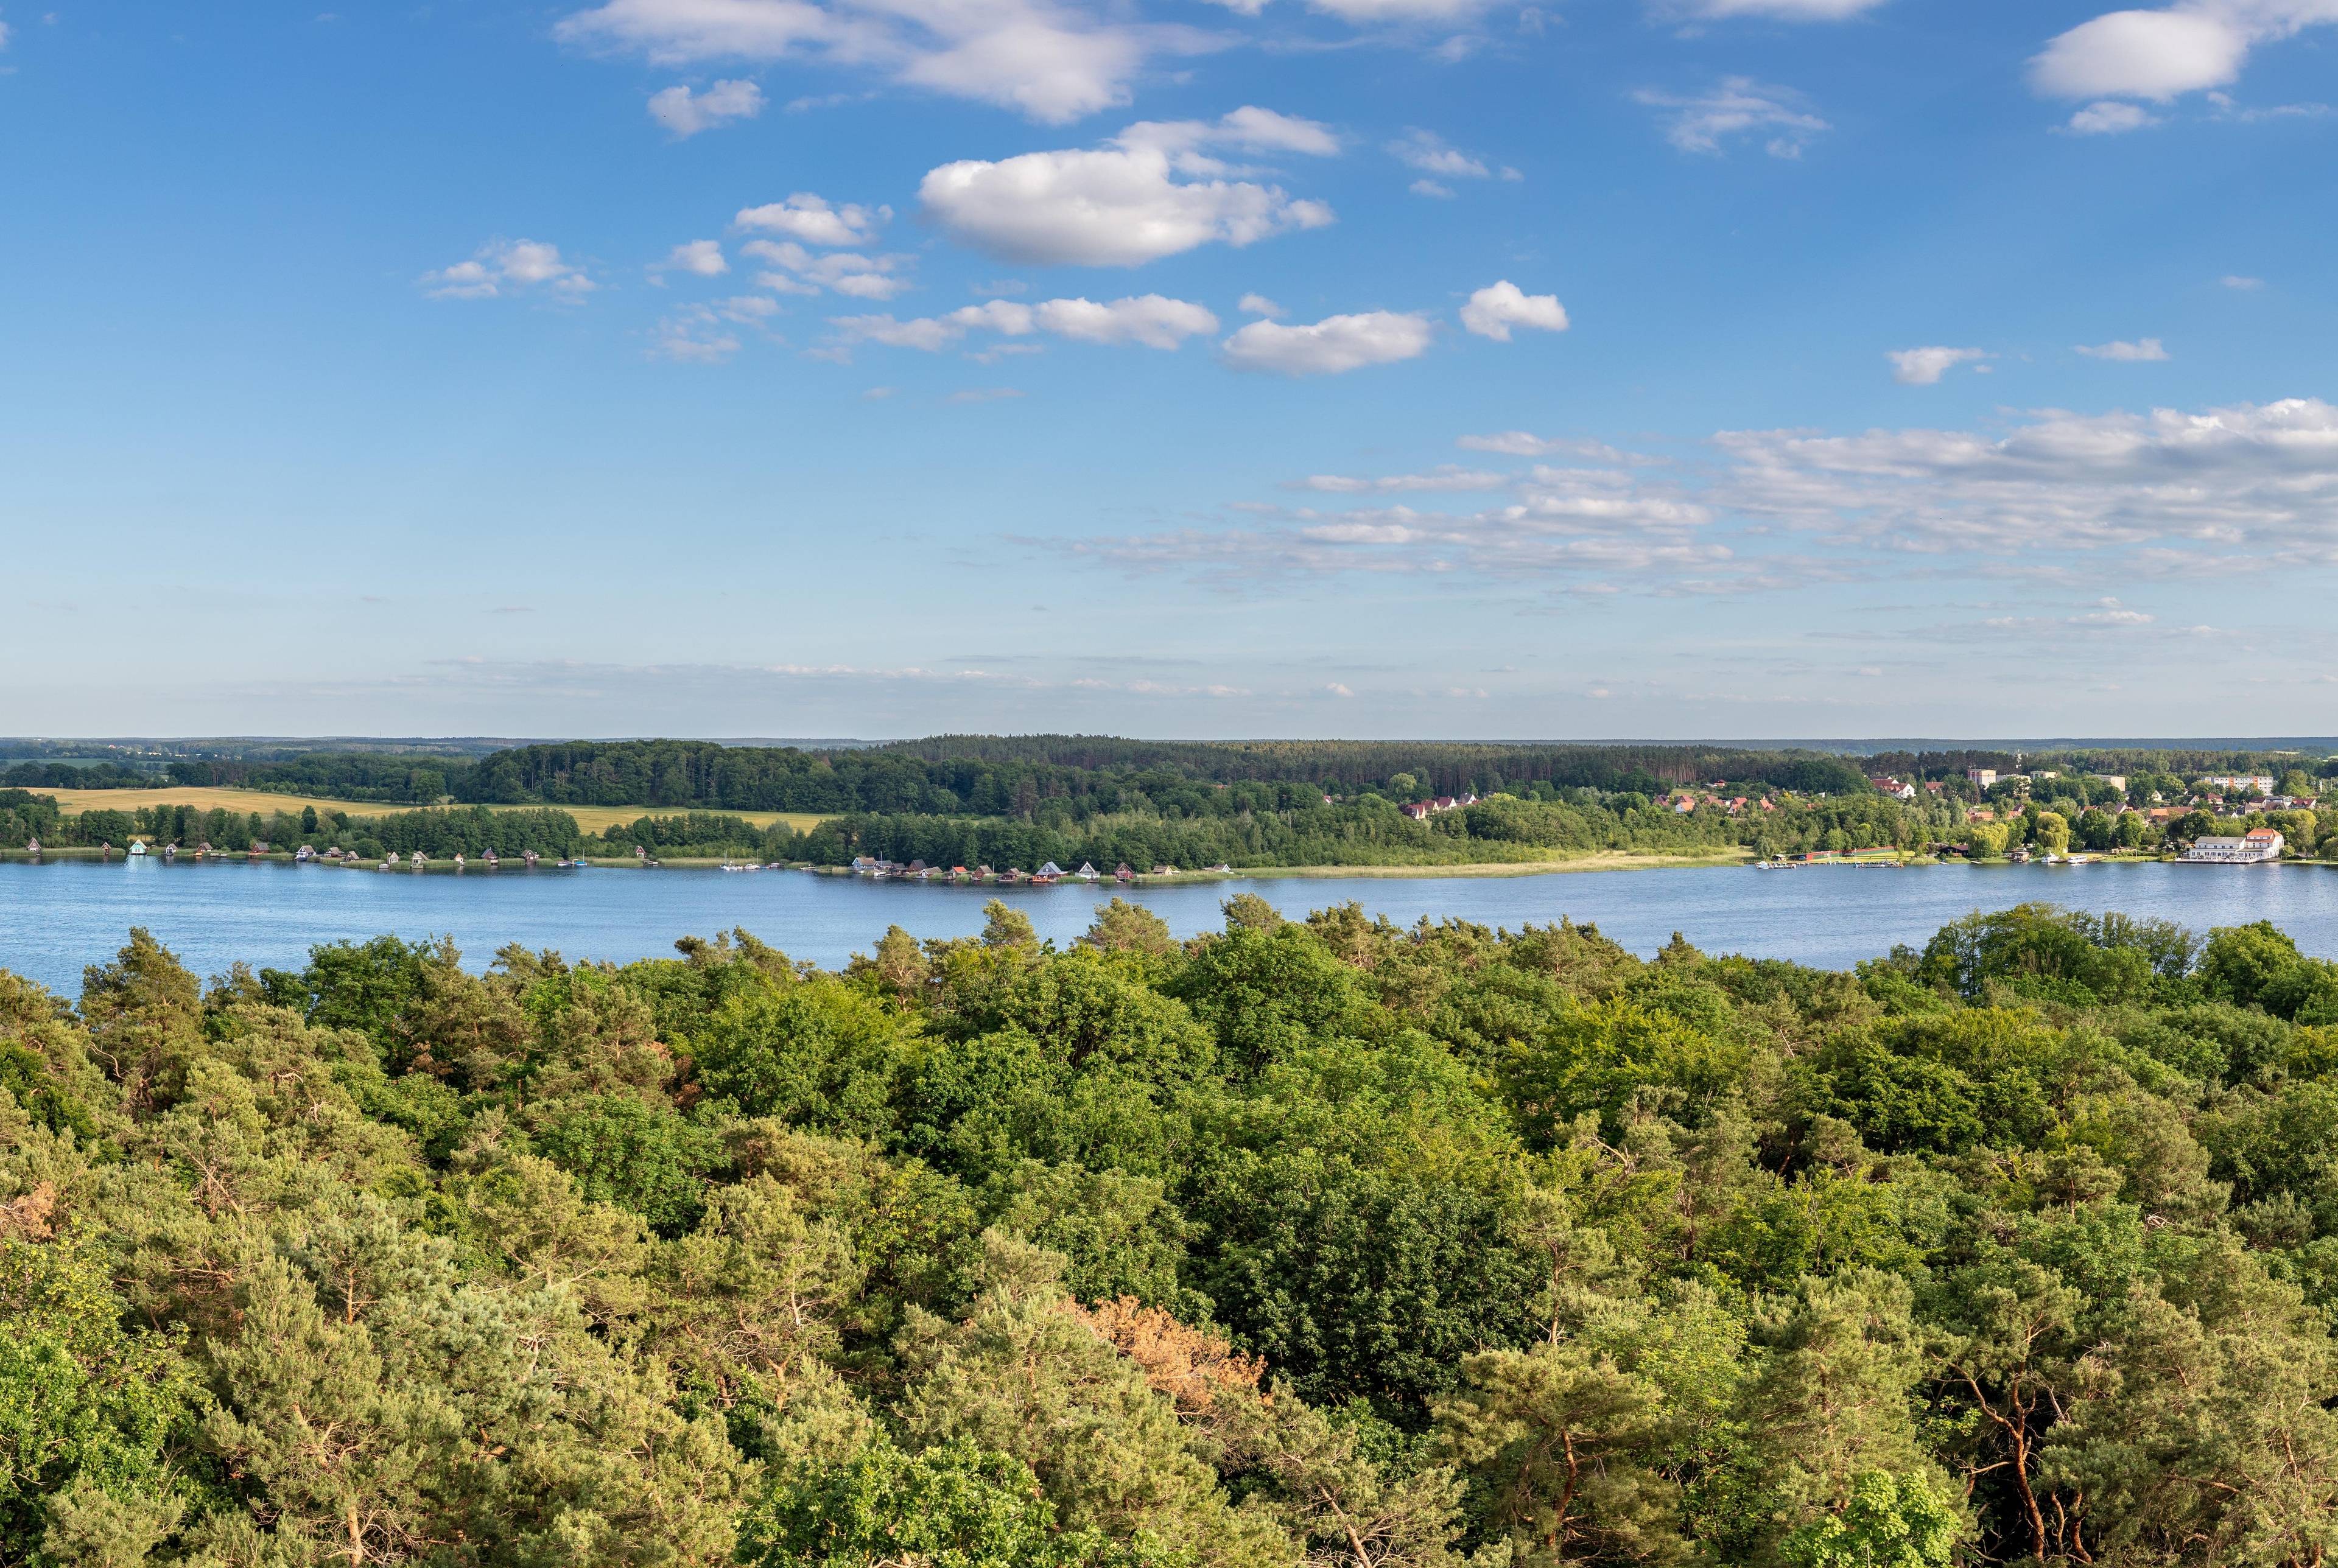 Lovely Lakes and Pretty Poland - A Cross Border Journey of Three Days